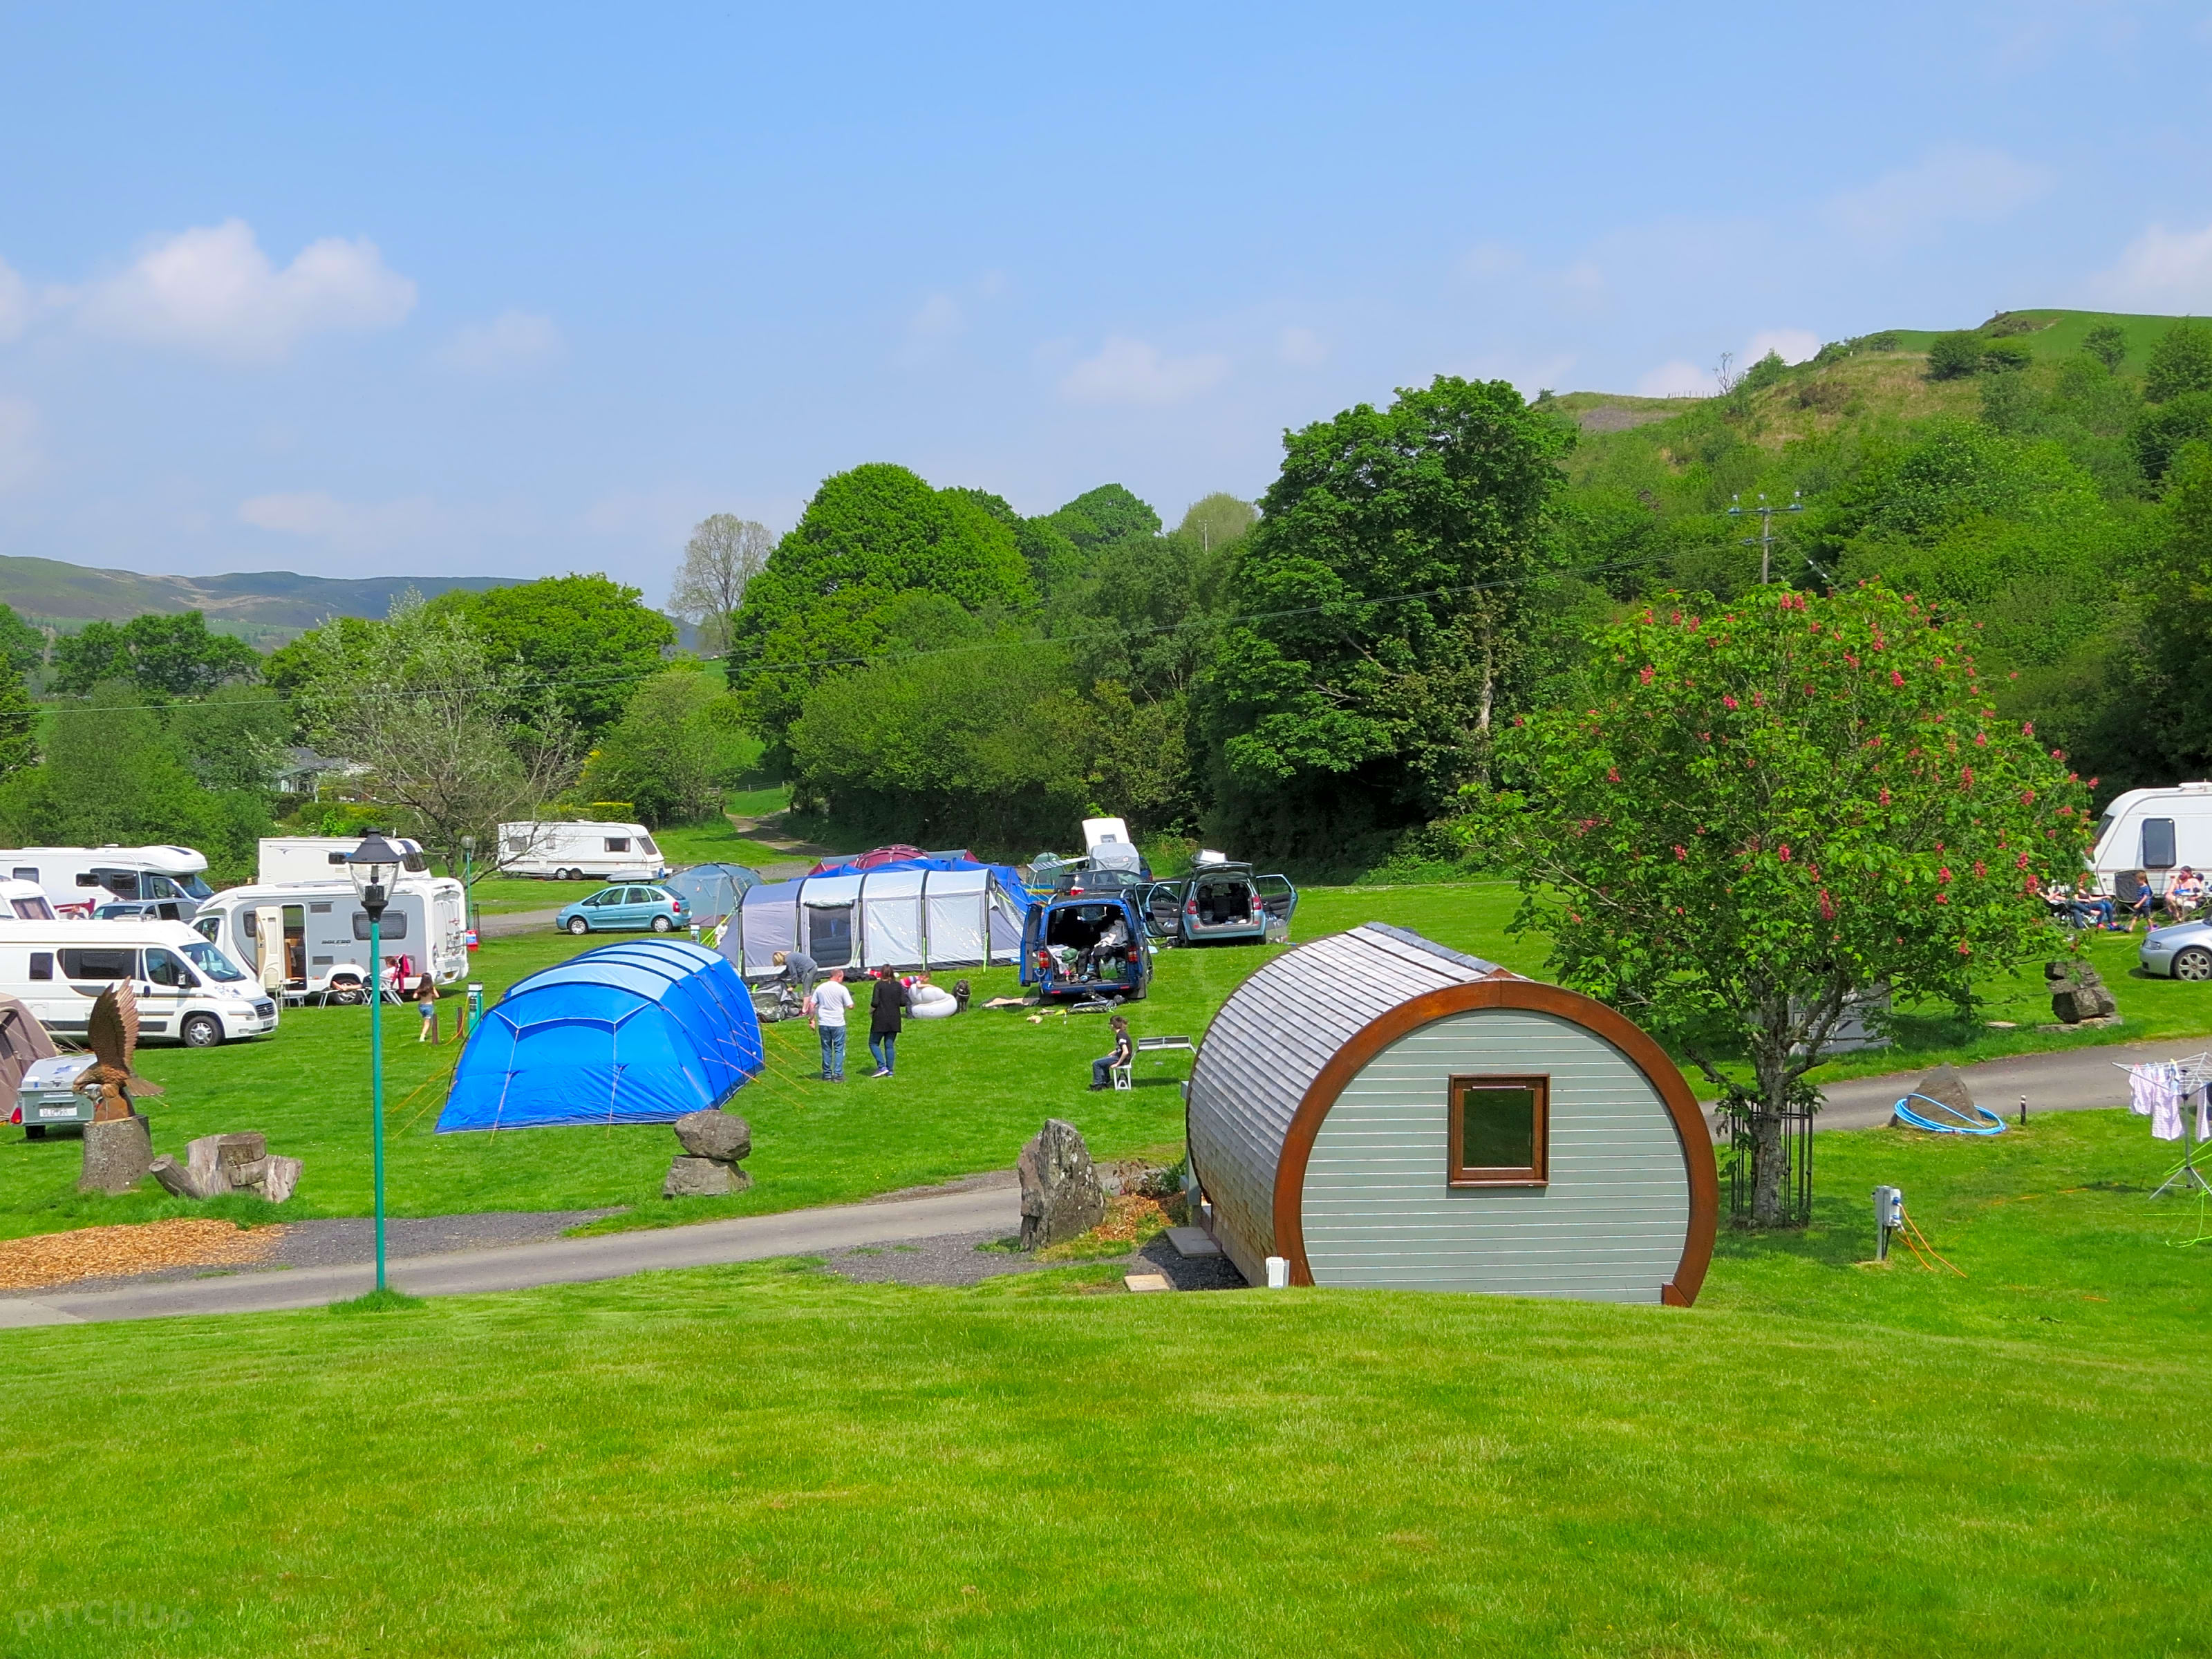 Woodlands Caravan Park, Aberystwyth - Updated 2020 prices - Pitchup®